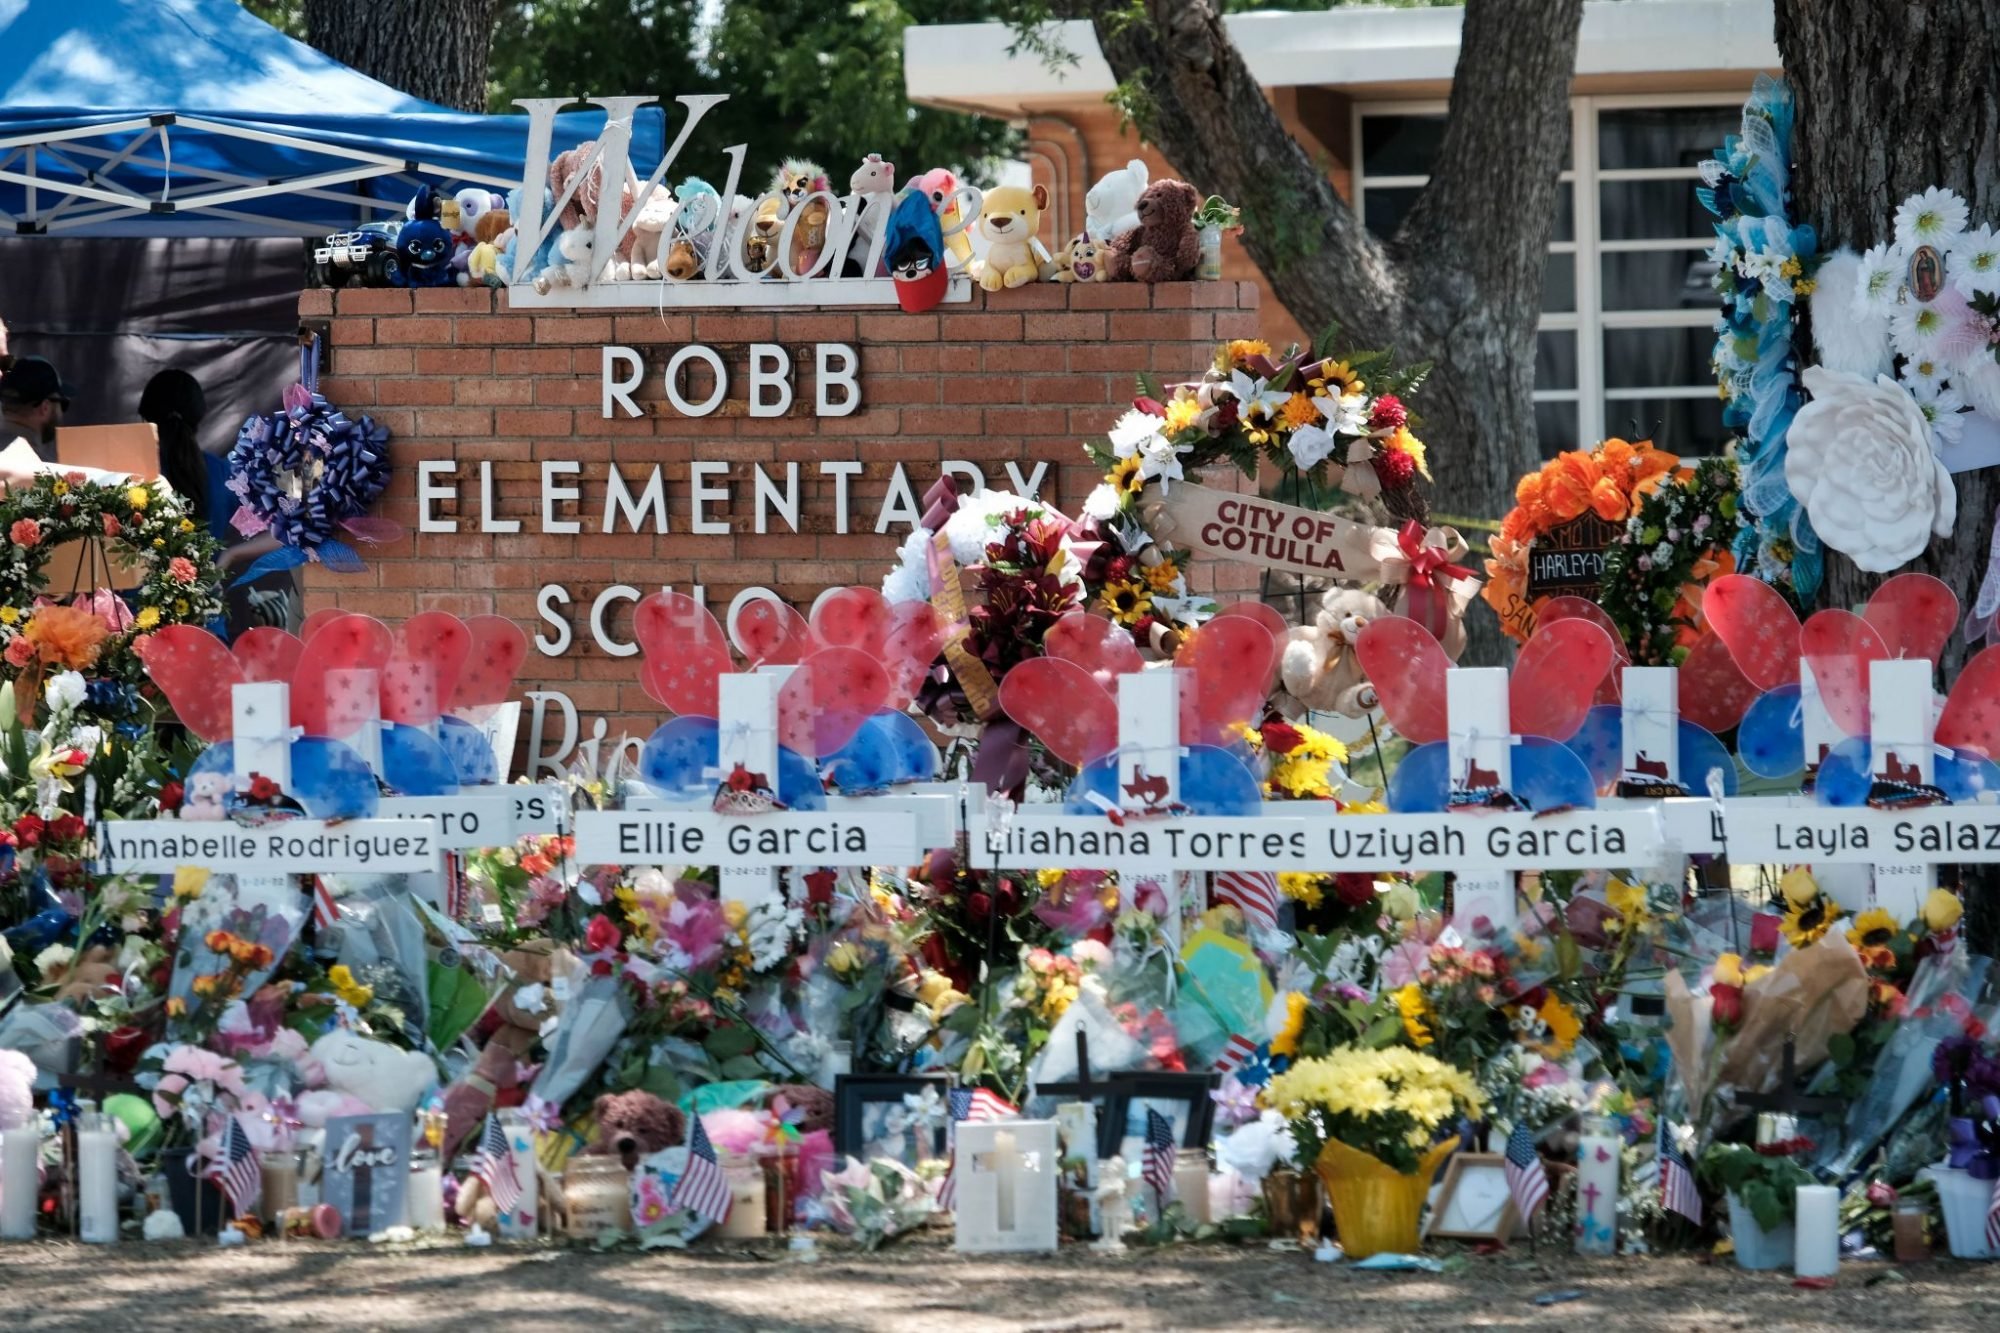 Memorial crosses bearing the names of those killed in the shooting sit in front the Robb Elementary School welcome sign.